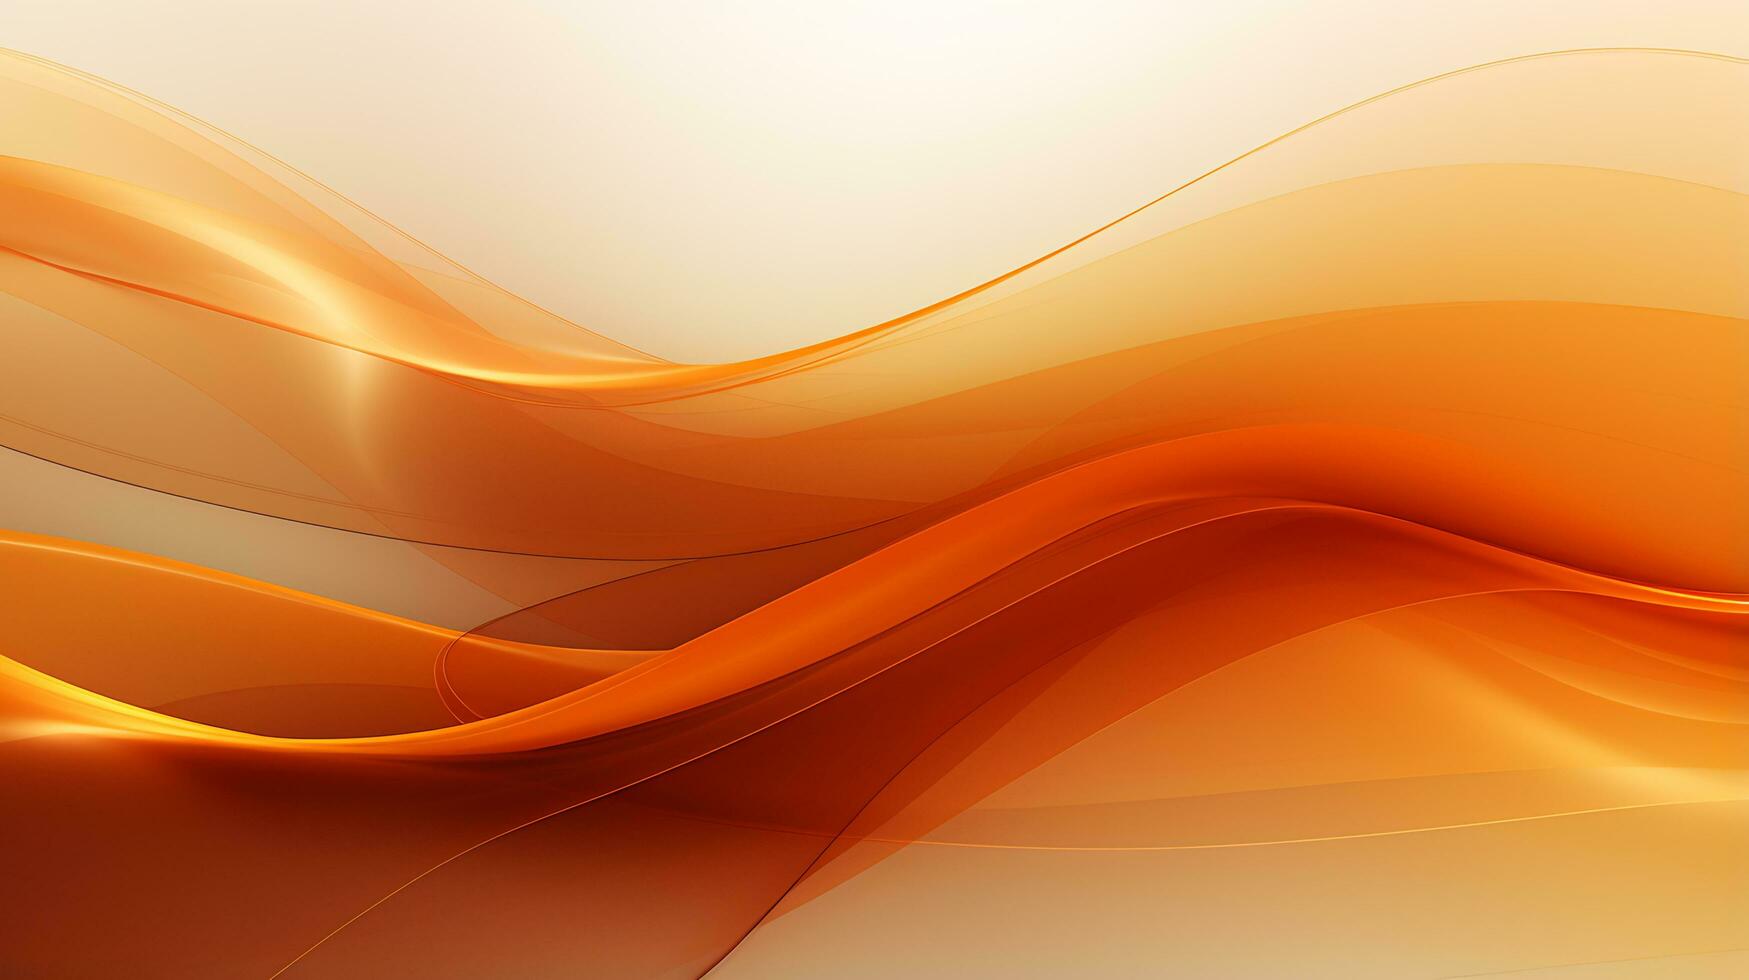 3D orange abstract wave background photo